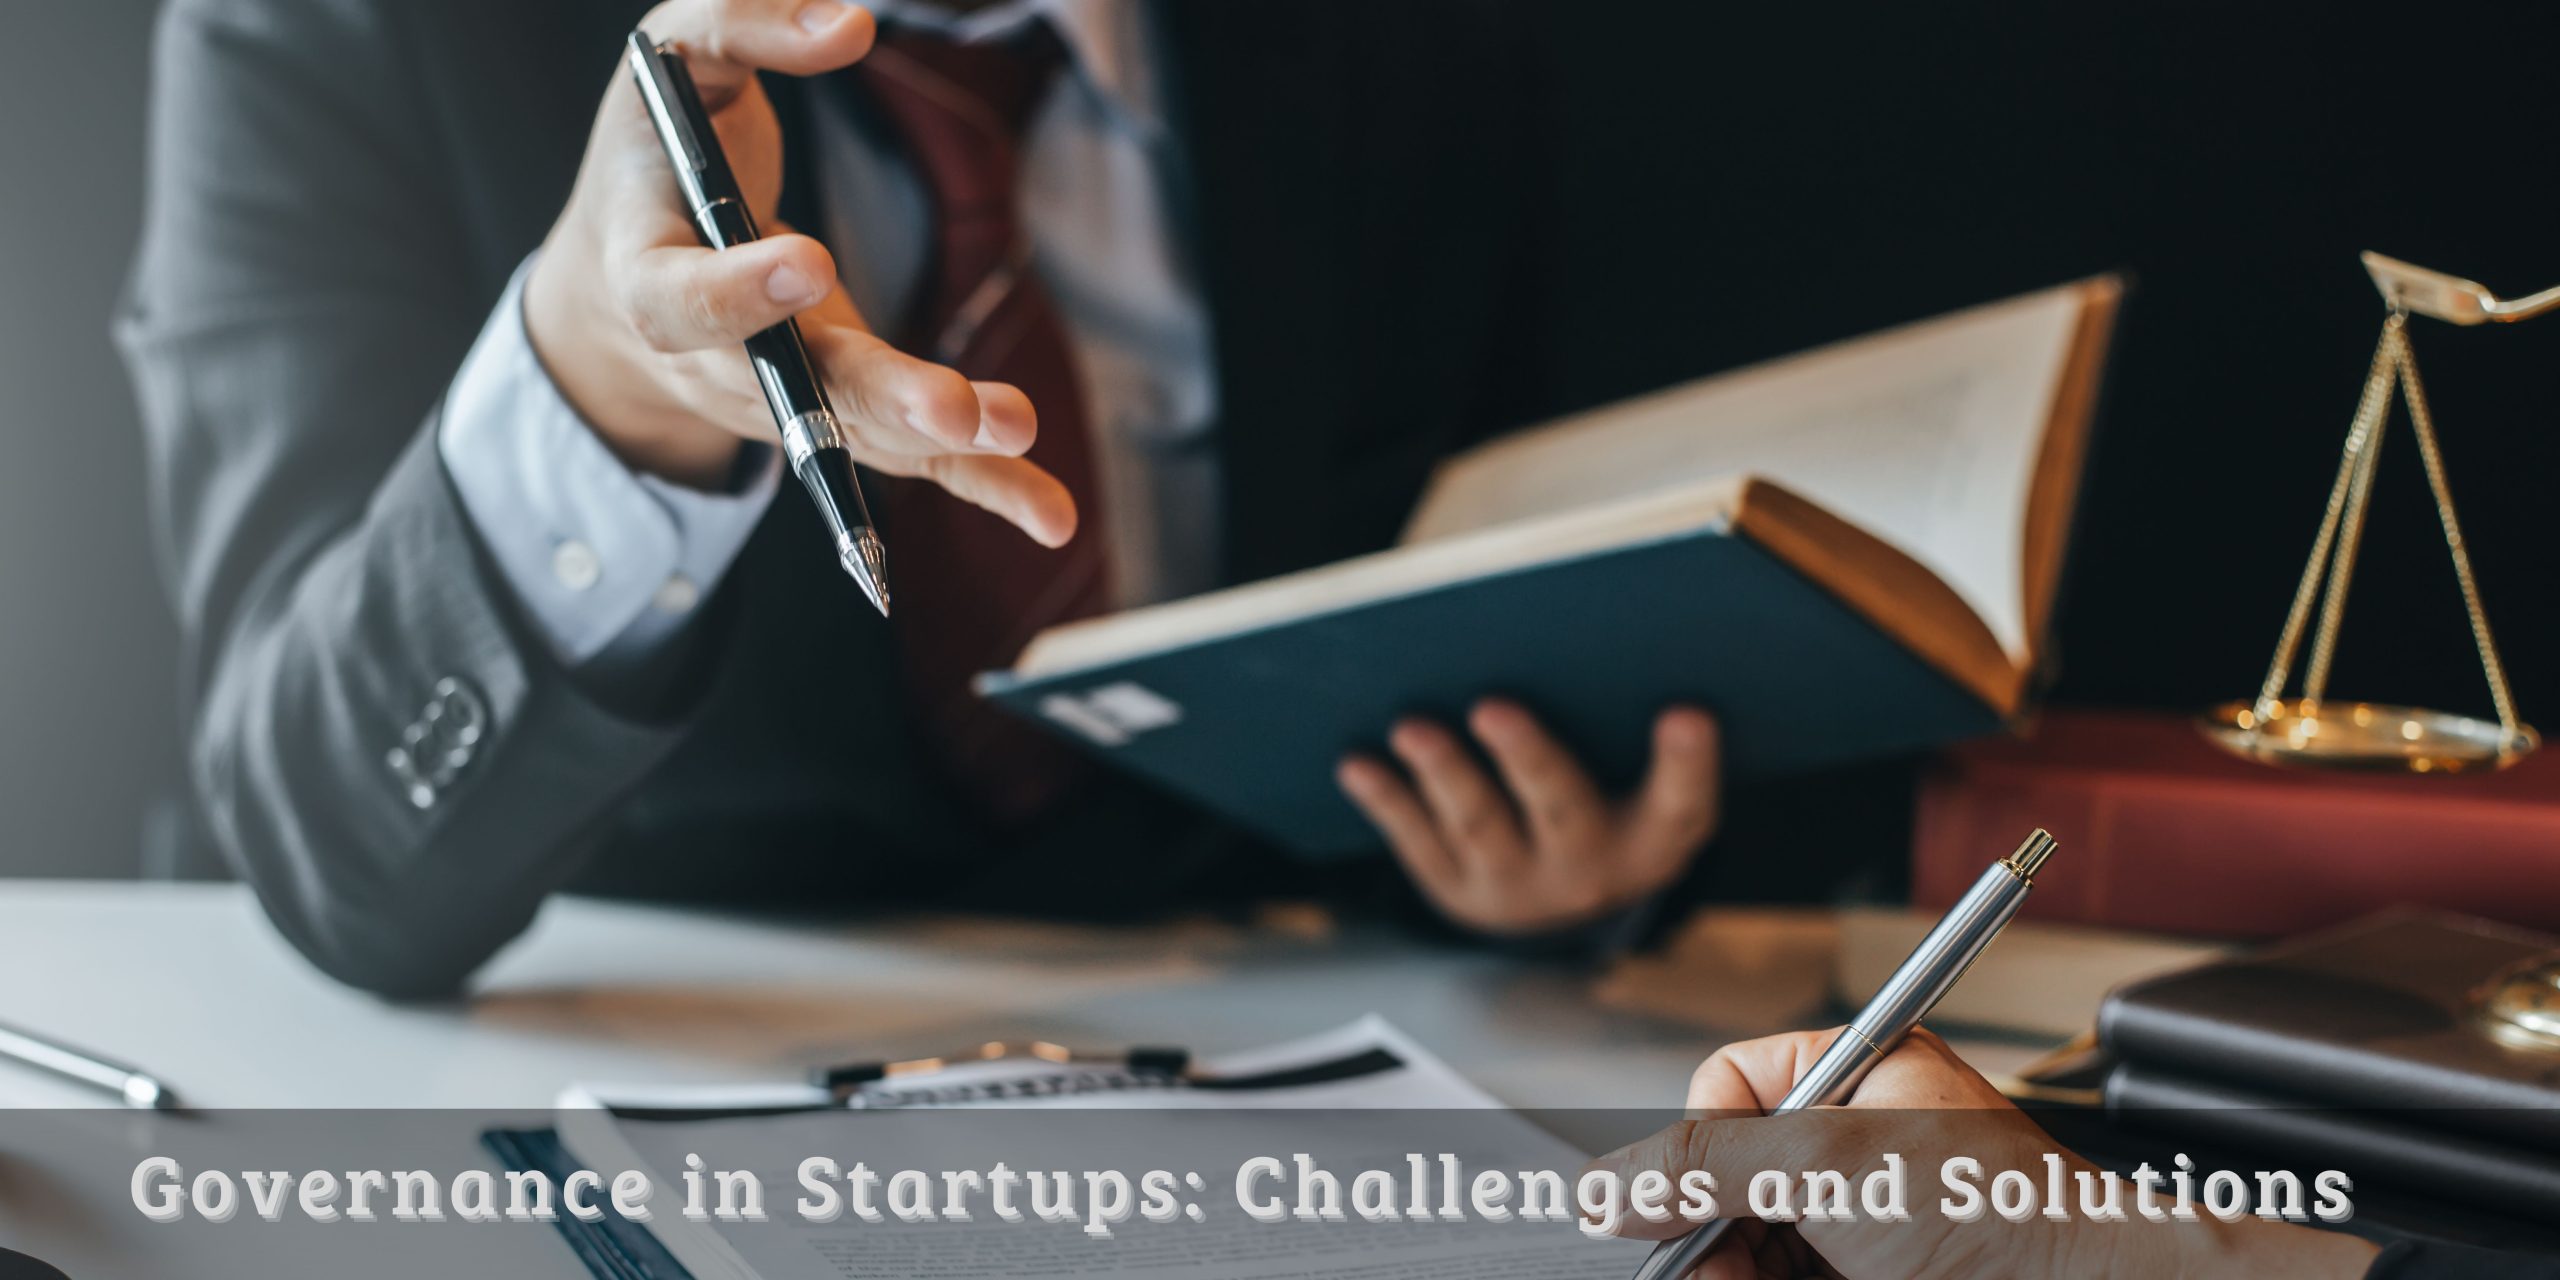 Governance in Startups: Challenges and Solutions